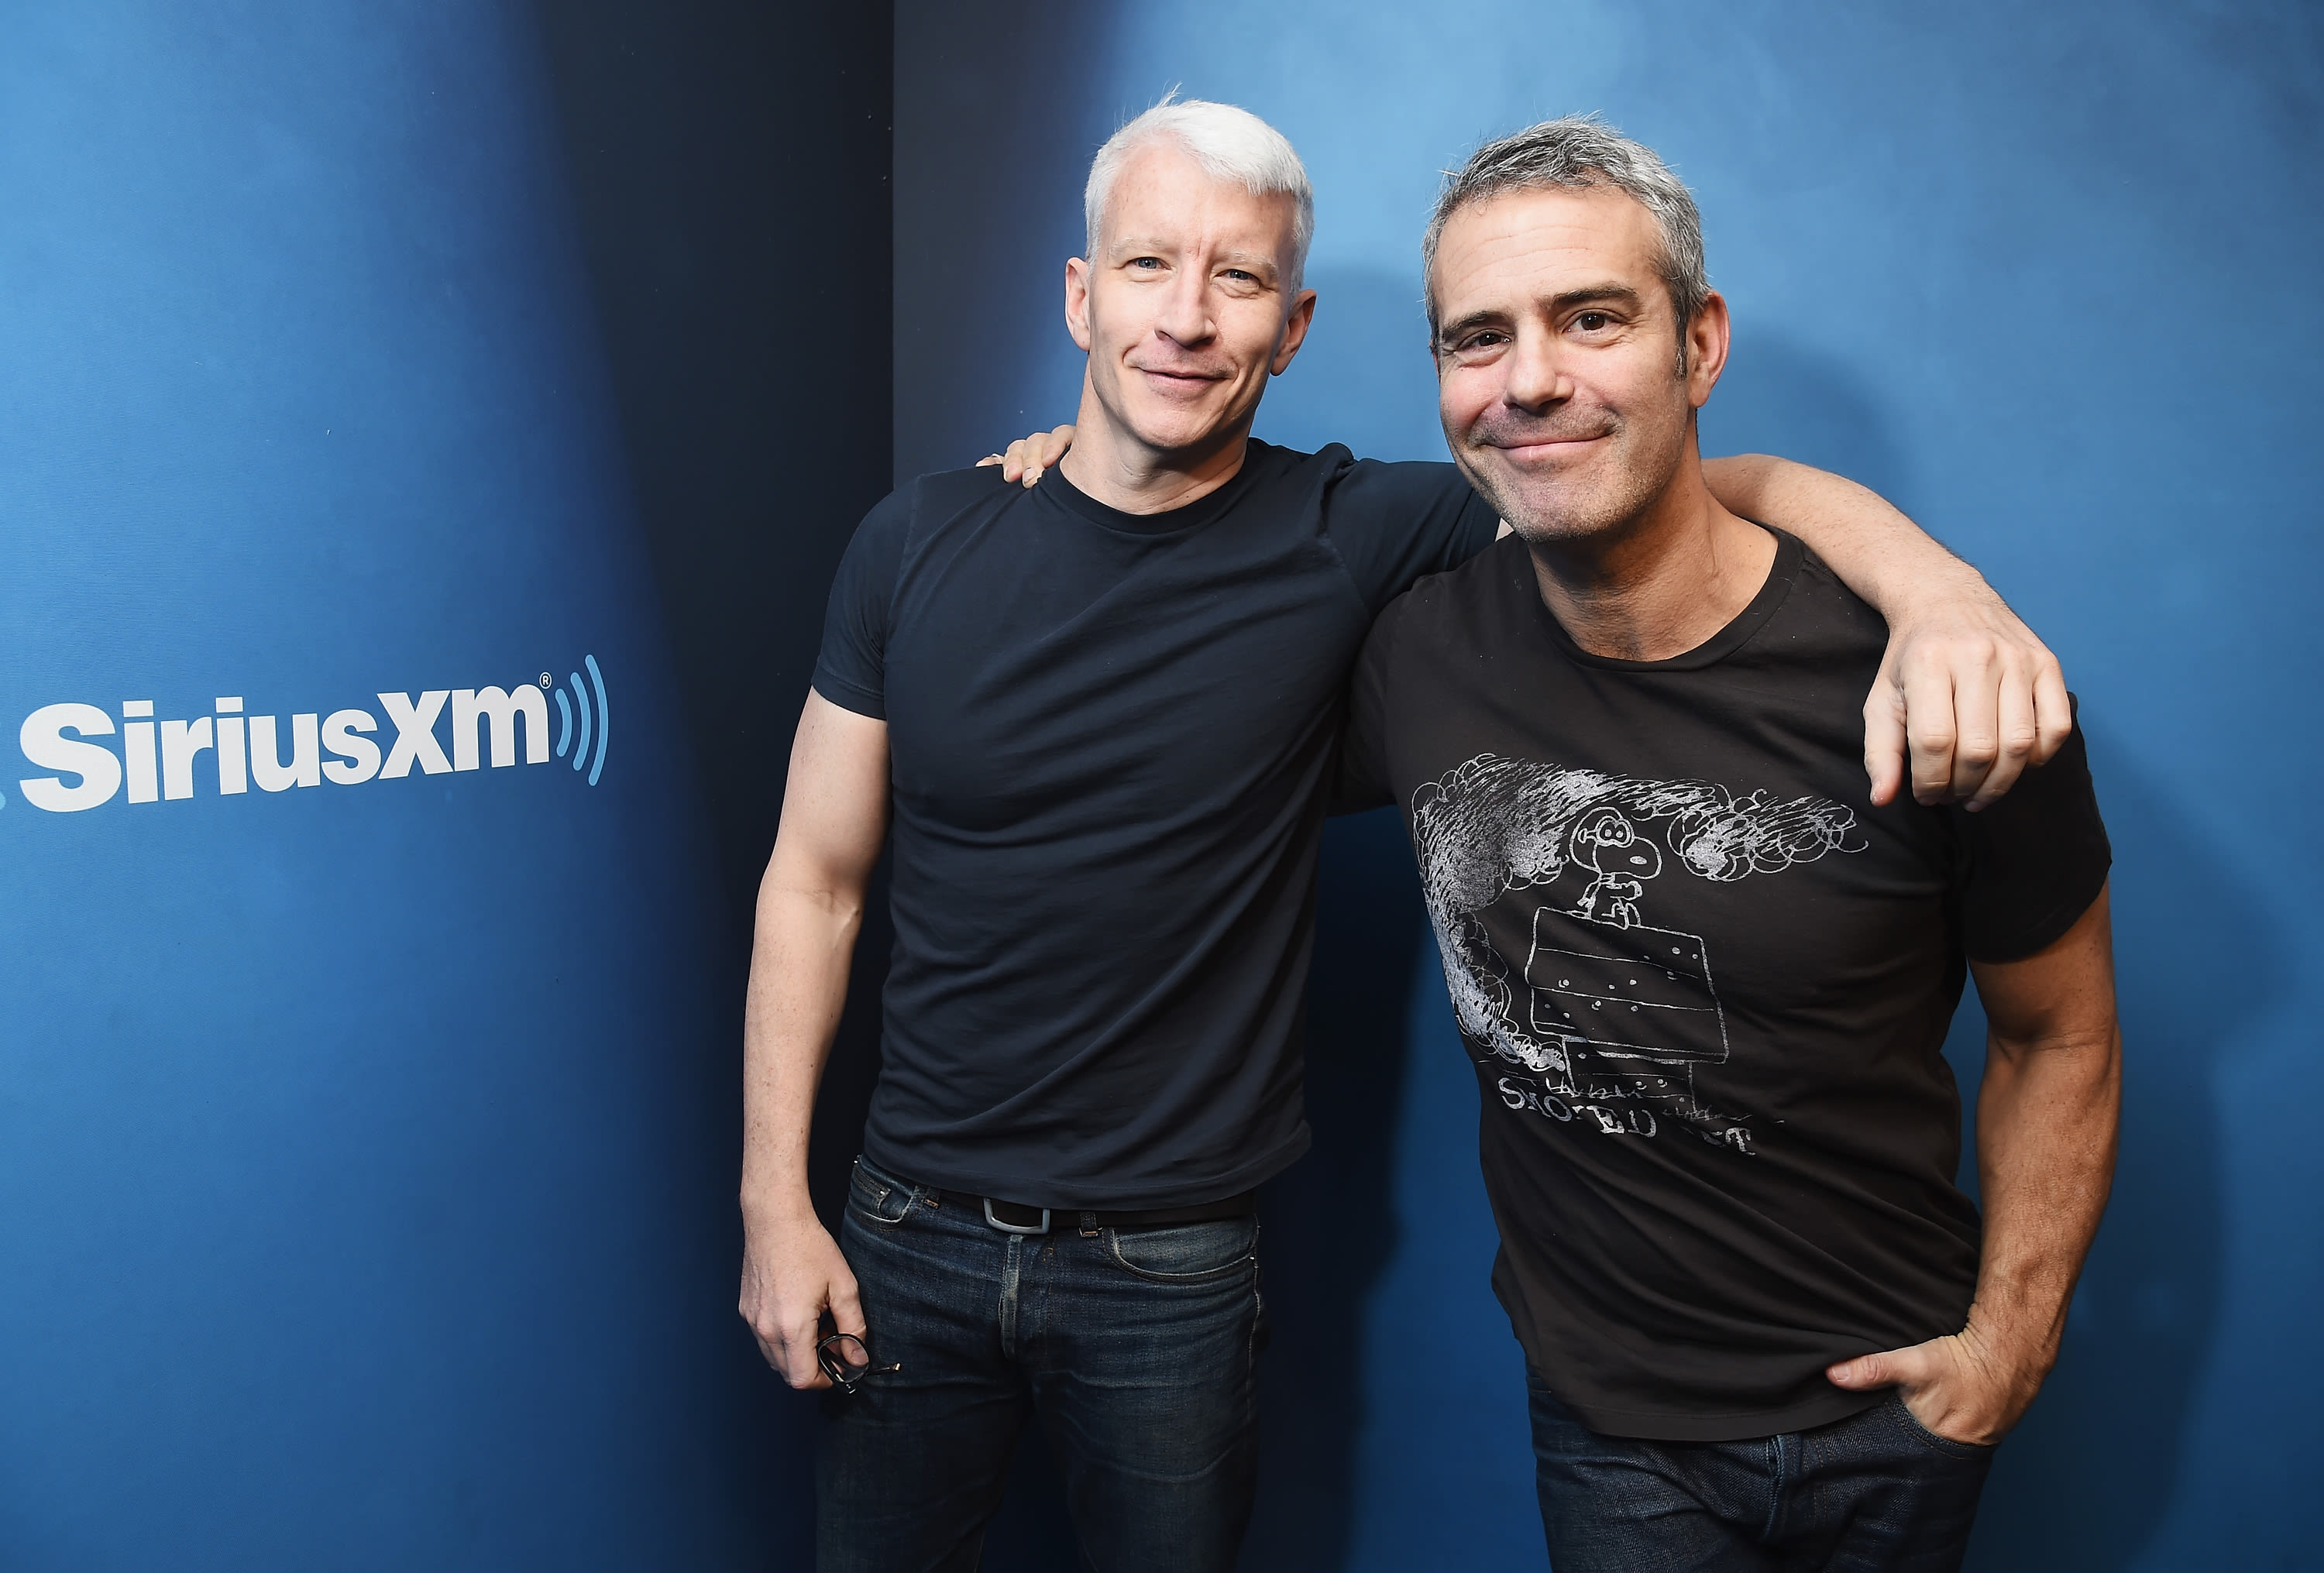 Anderson Cooper Shares Update on Best Friend Andy Cohen Amid Housewives Allegations